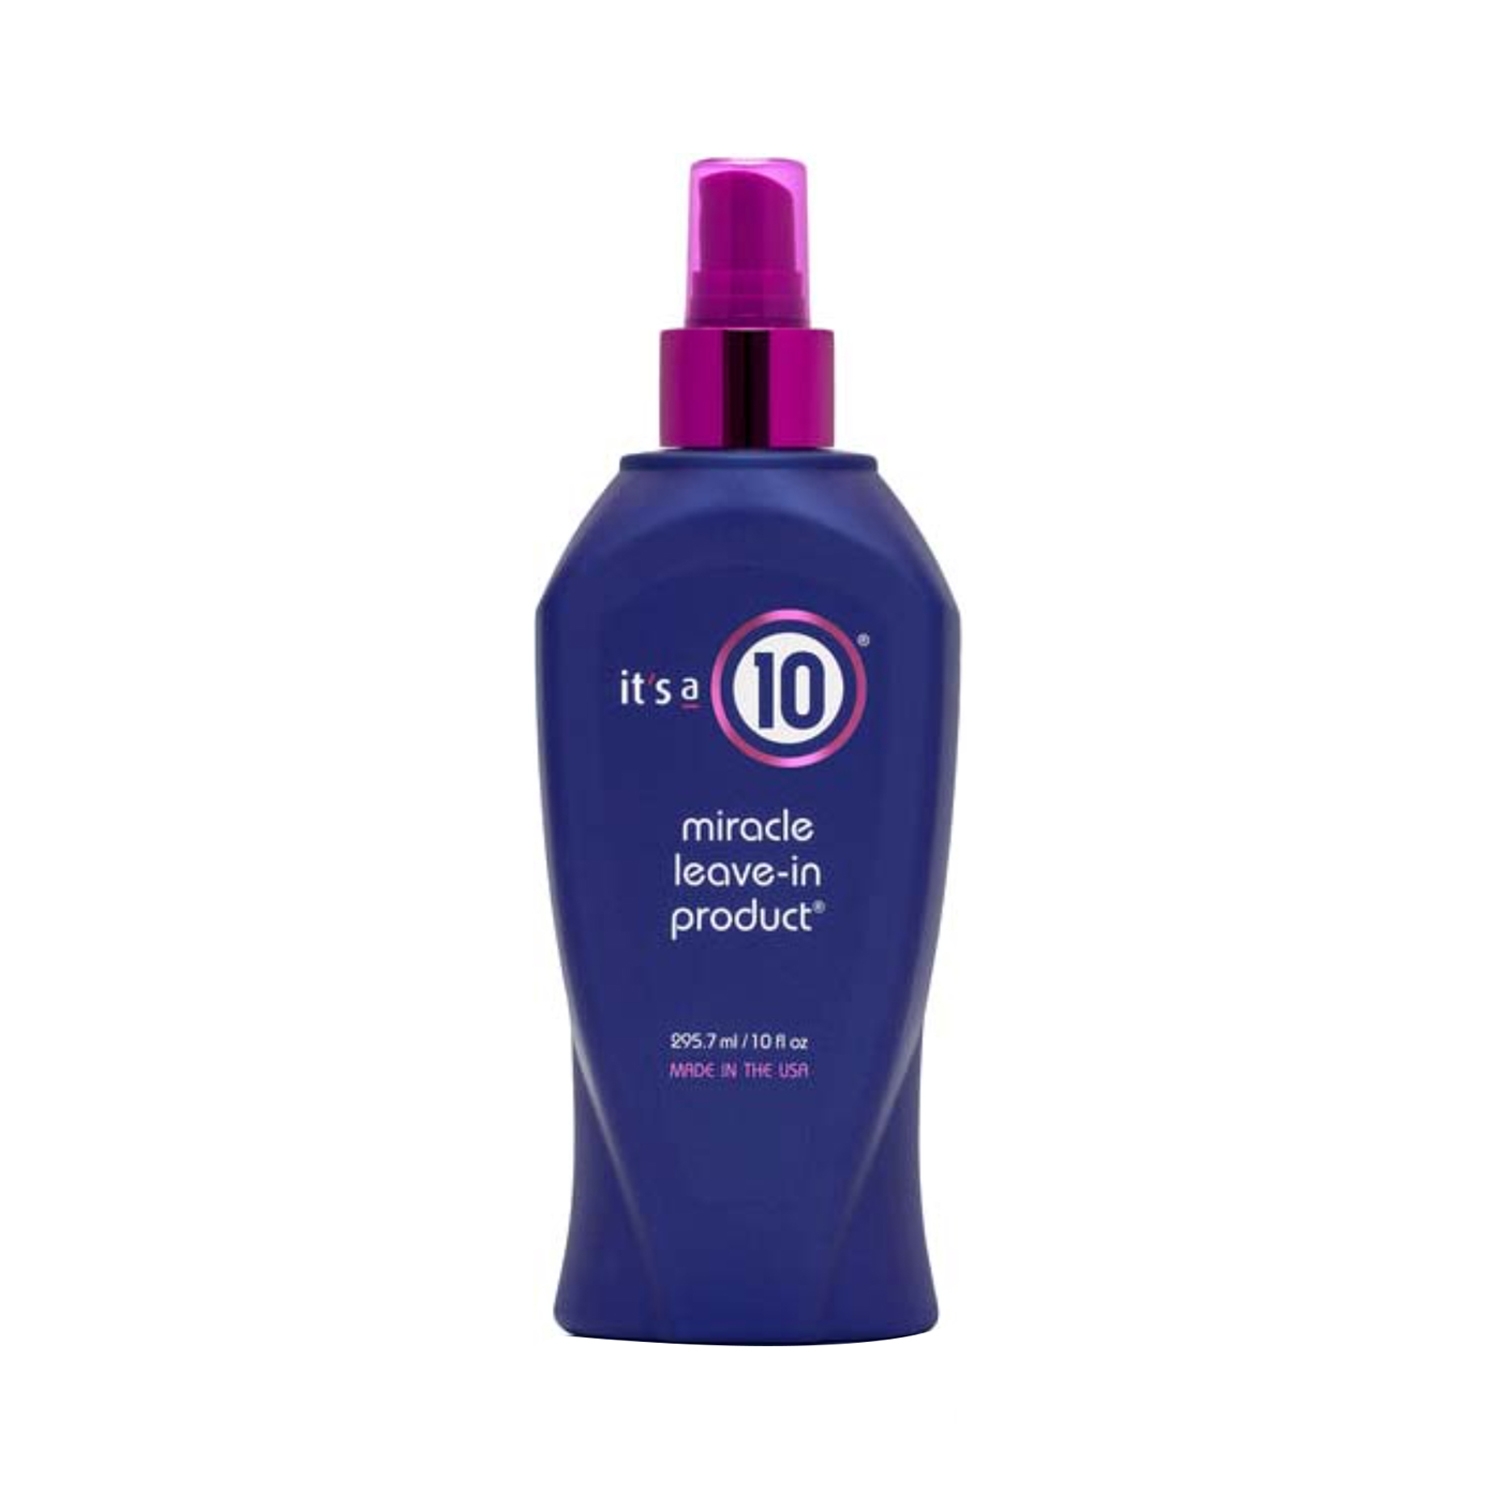 It's a 10 Haircare | It's a 10 Haircare Miracle Leave In Product (295.7ml)